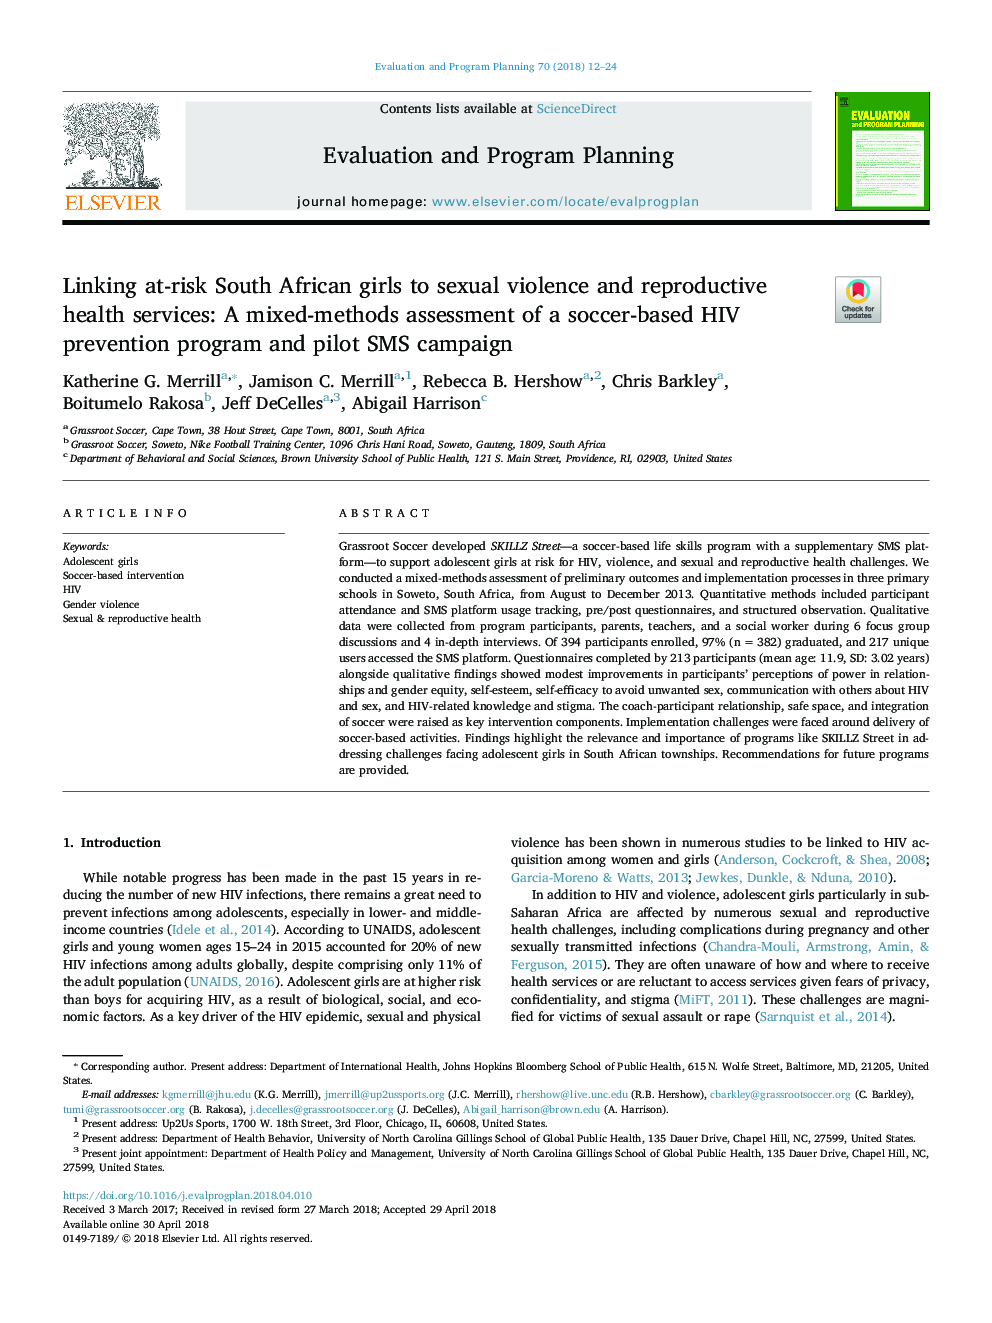 Linking at-risk South African girls to sexual violence and reproductive health services: A mixed-methods assessment of a soccer-based HIV prevention program and pilot SMS campaign